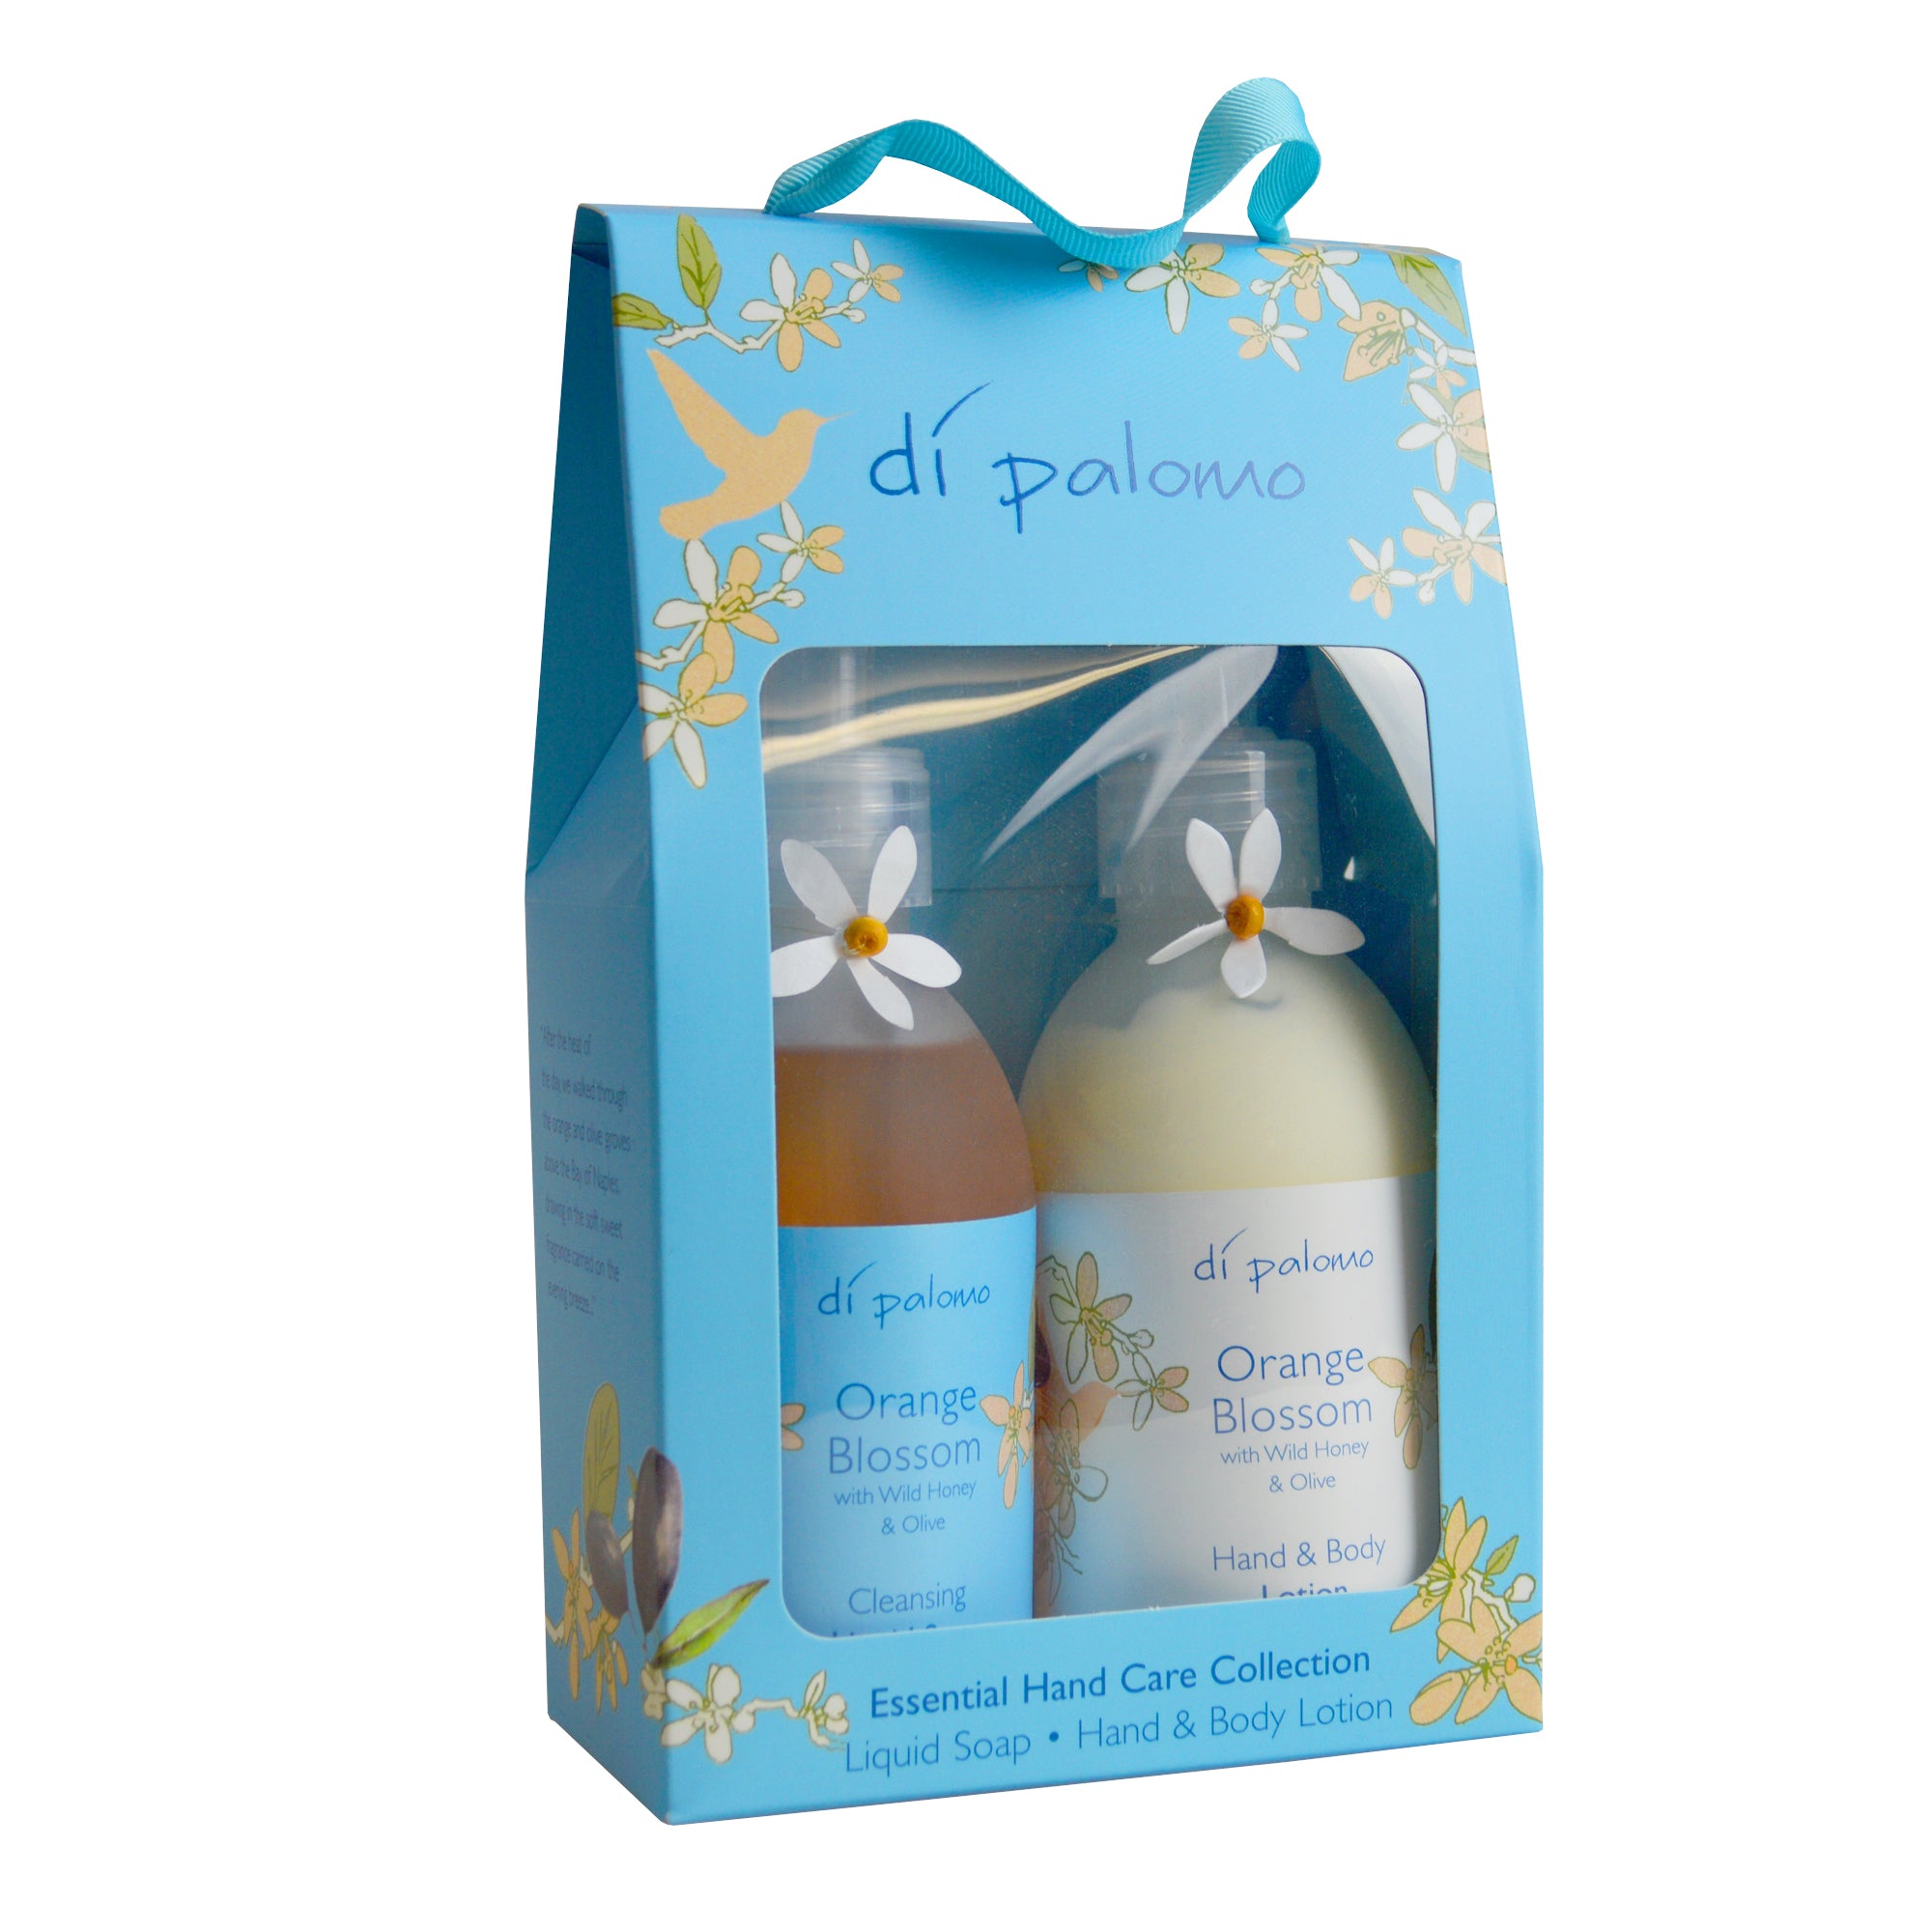 A Magical mix of our Orange Blossom Liquid Soap and luxurious Hand & Body Lotion.